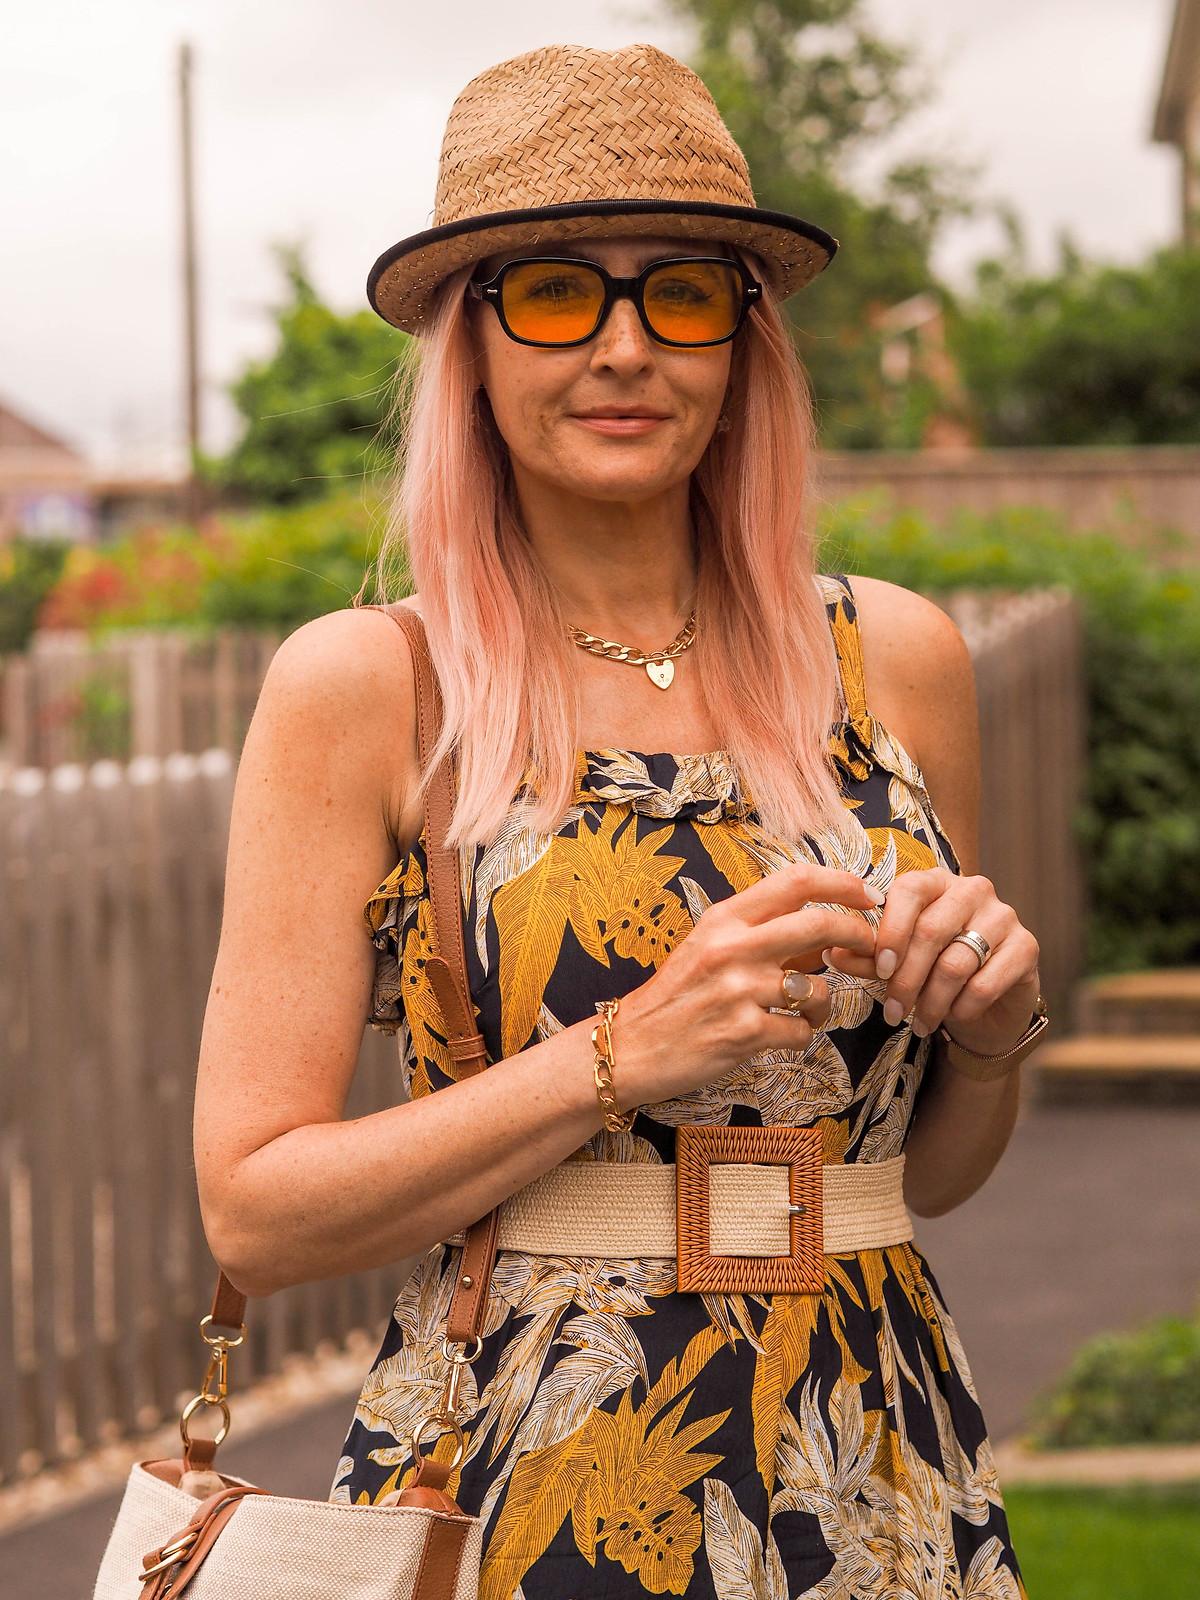 The Power of Accessories: Styling a Tiered Summer Dress (yellow/black/white dress with raffia belt, white slider sandals, brown/ecru shoulder bag, yellow lens glasses & a straw trilby) | Not Dressed As Lamb